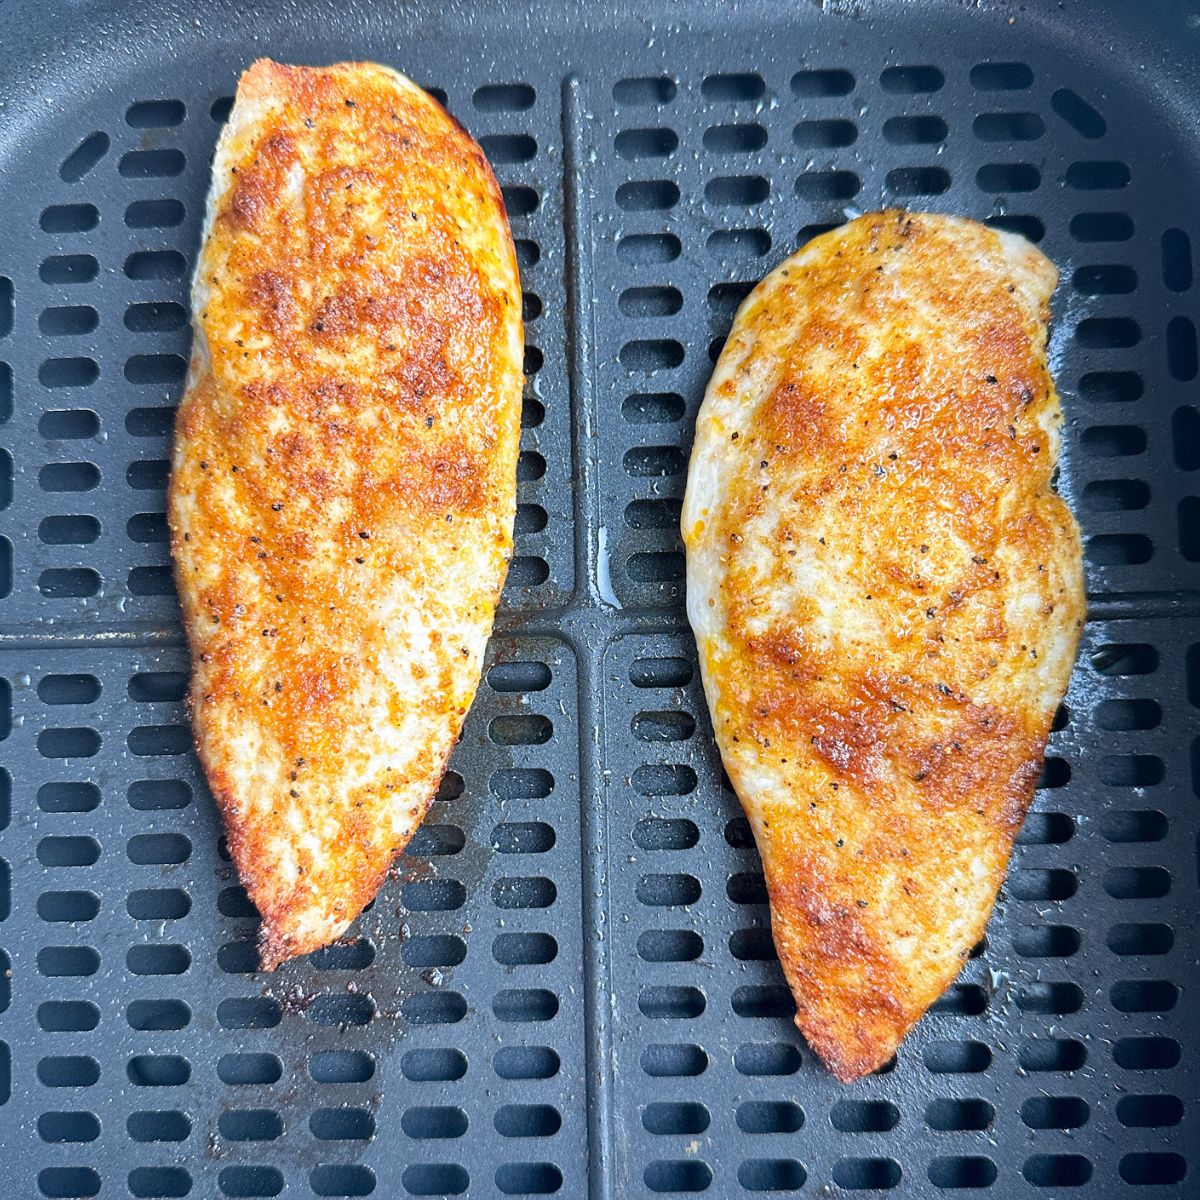 Cooked chicken breasts in air fryer basket.